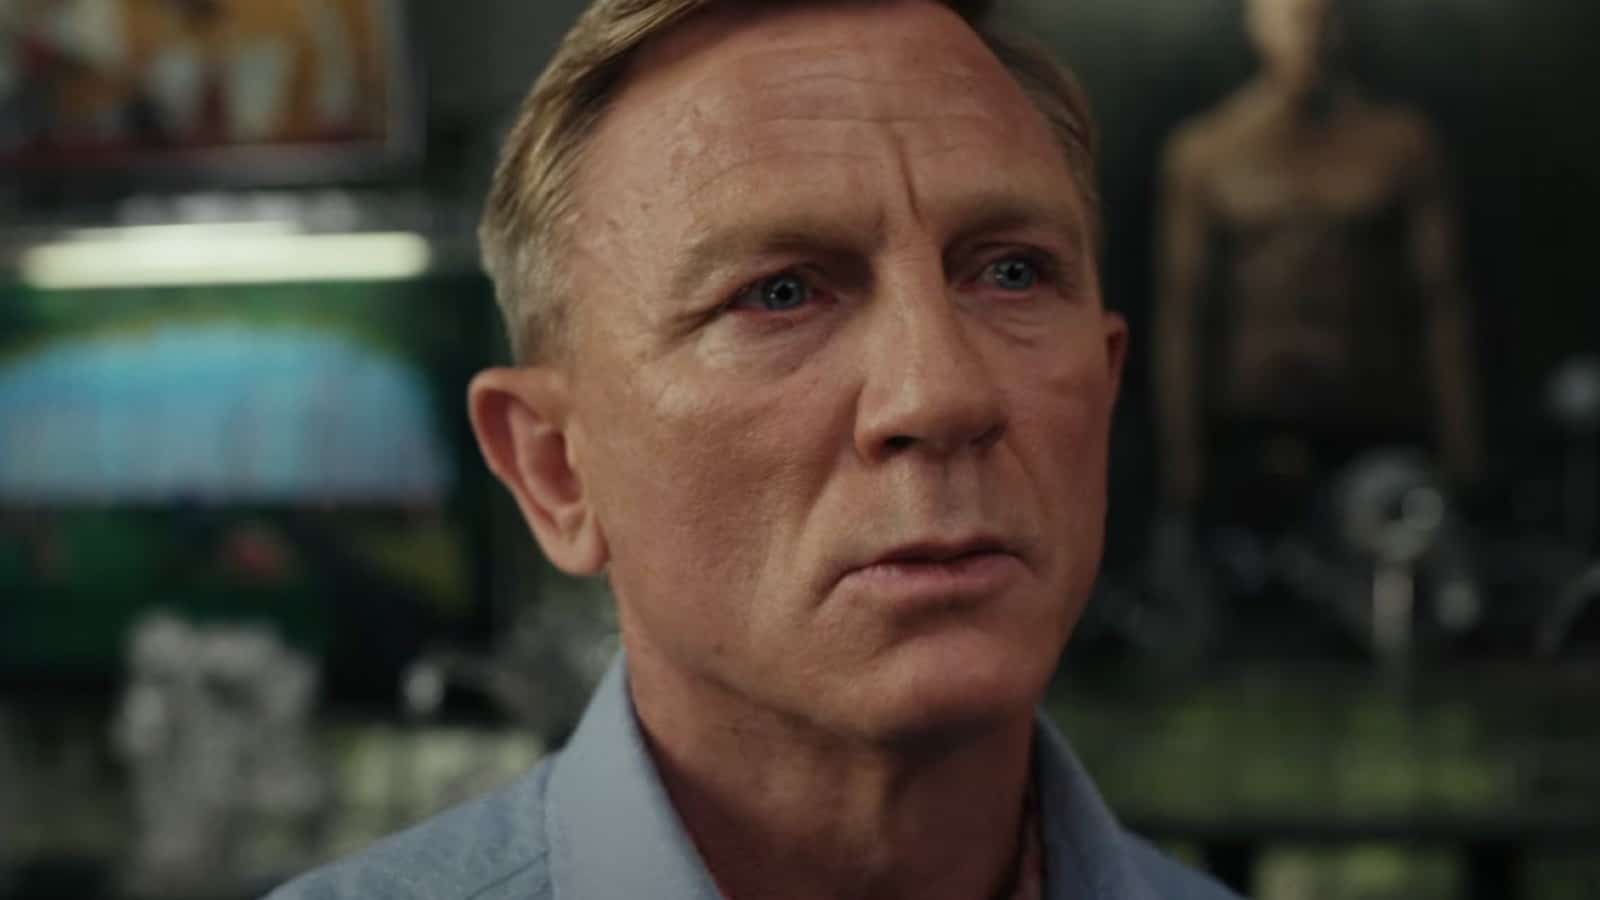 A still of Daniel Craig in the Knives Out 2 trailer